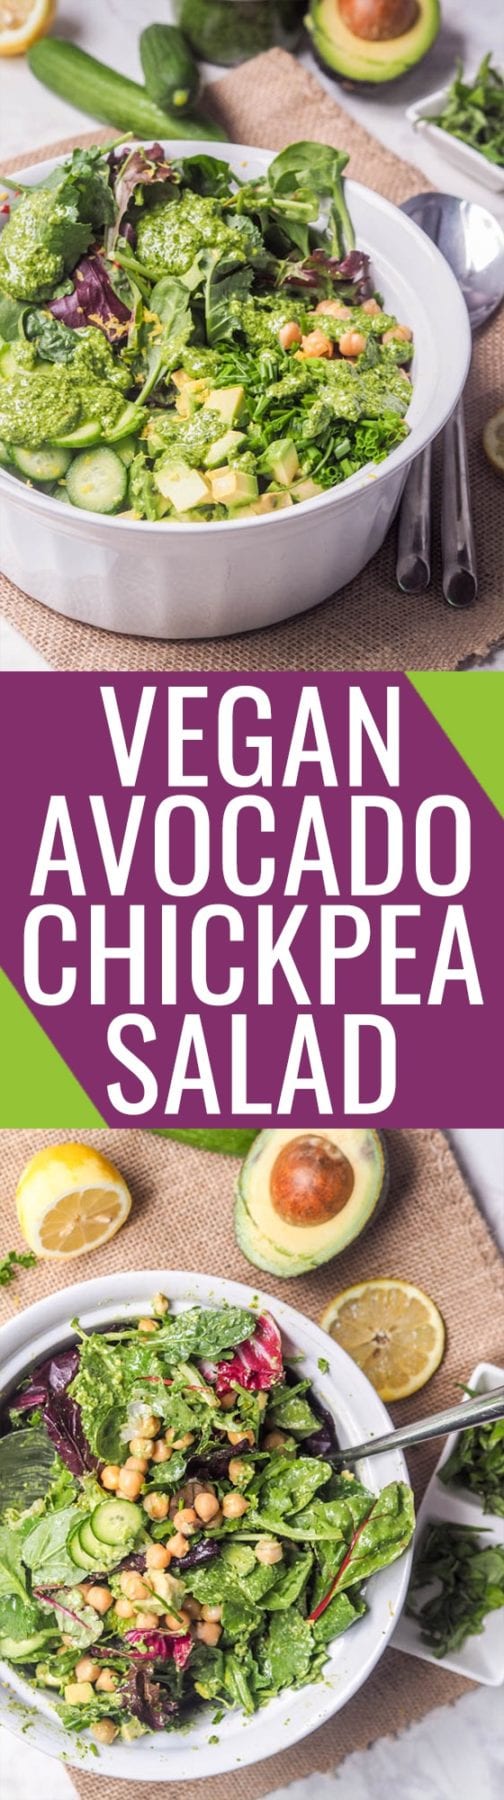 Avocado Chickpea Salad with vegan pesto makes for the perfect lunch recipe that is ready in minutes. Super simple 5 ingredient recipe packed full of flavor and protein. Lunch or grill day appetizers don't get easier than this! 